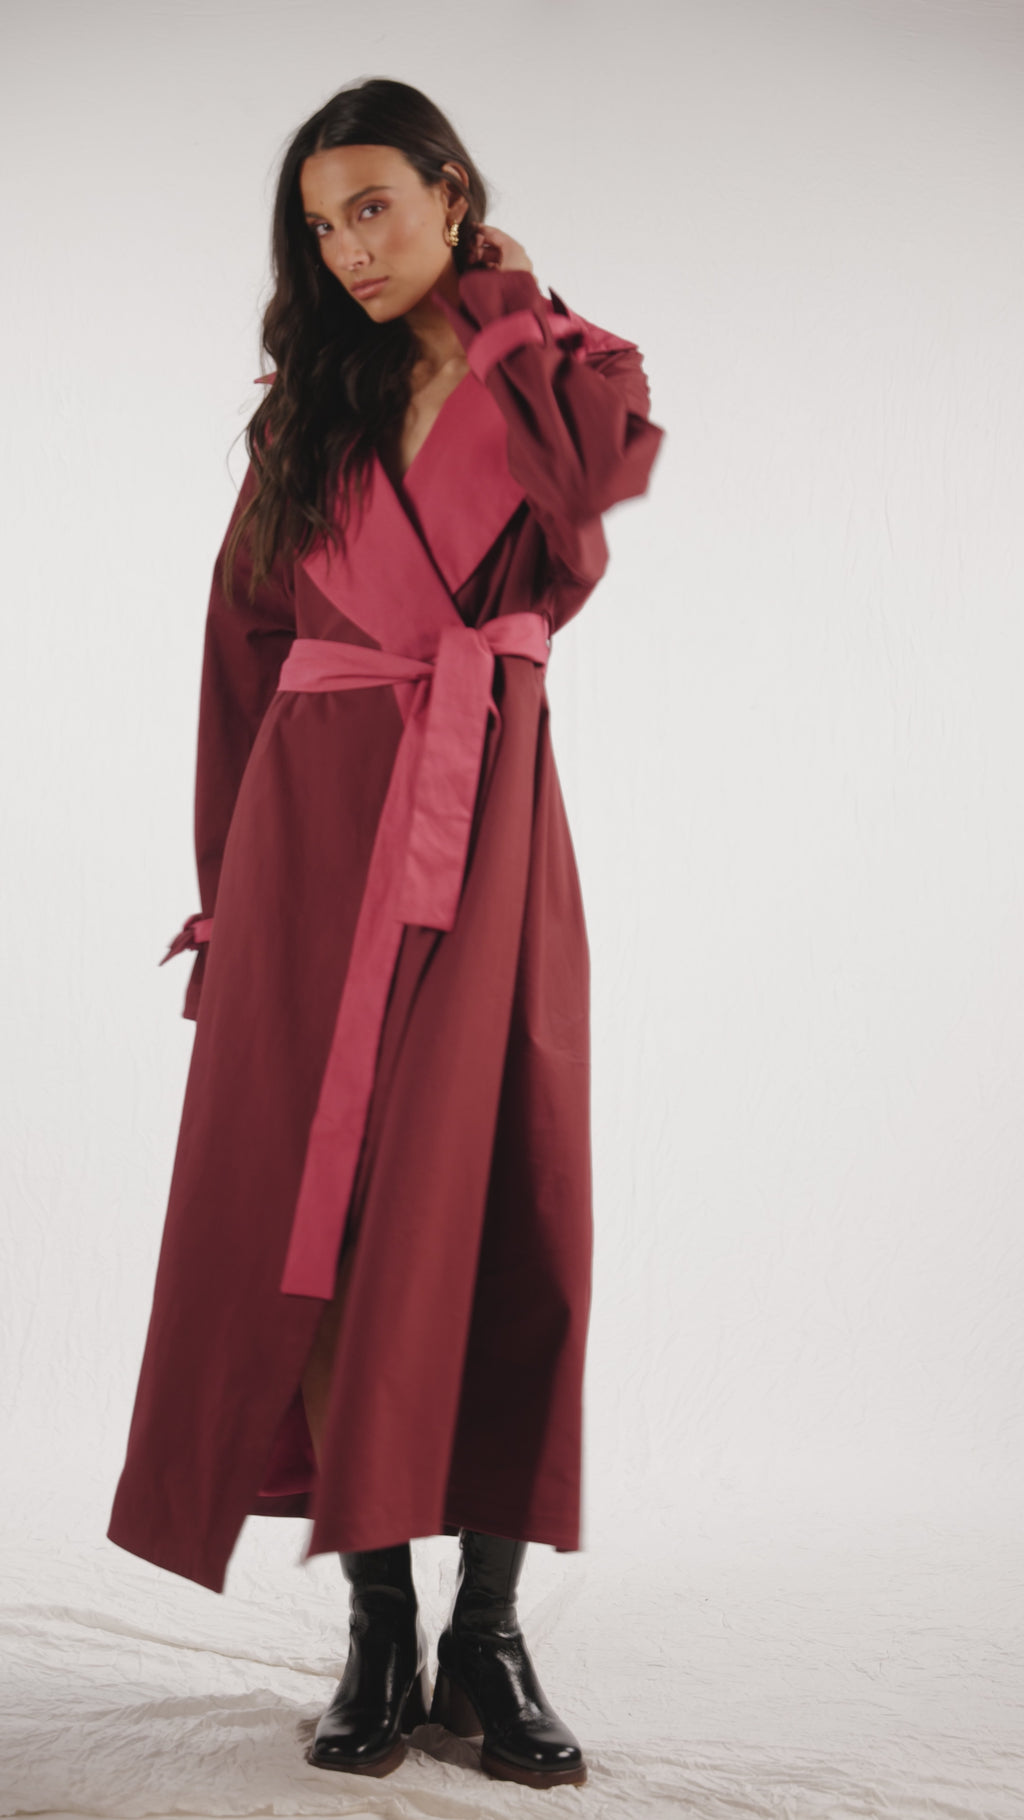 Reversible red or pink coat with detachable belt, front welt pockets and belted cuffs.